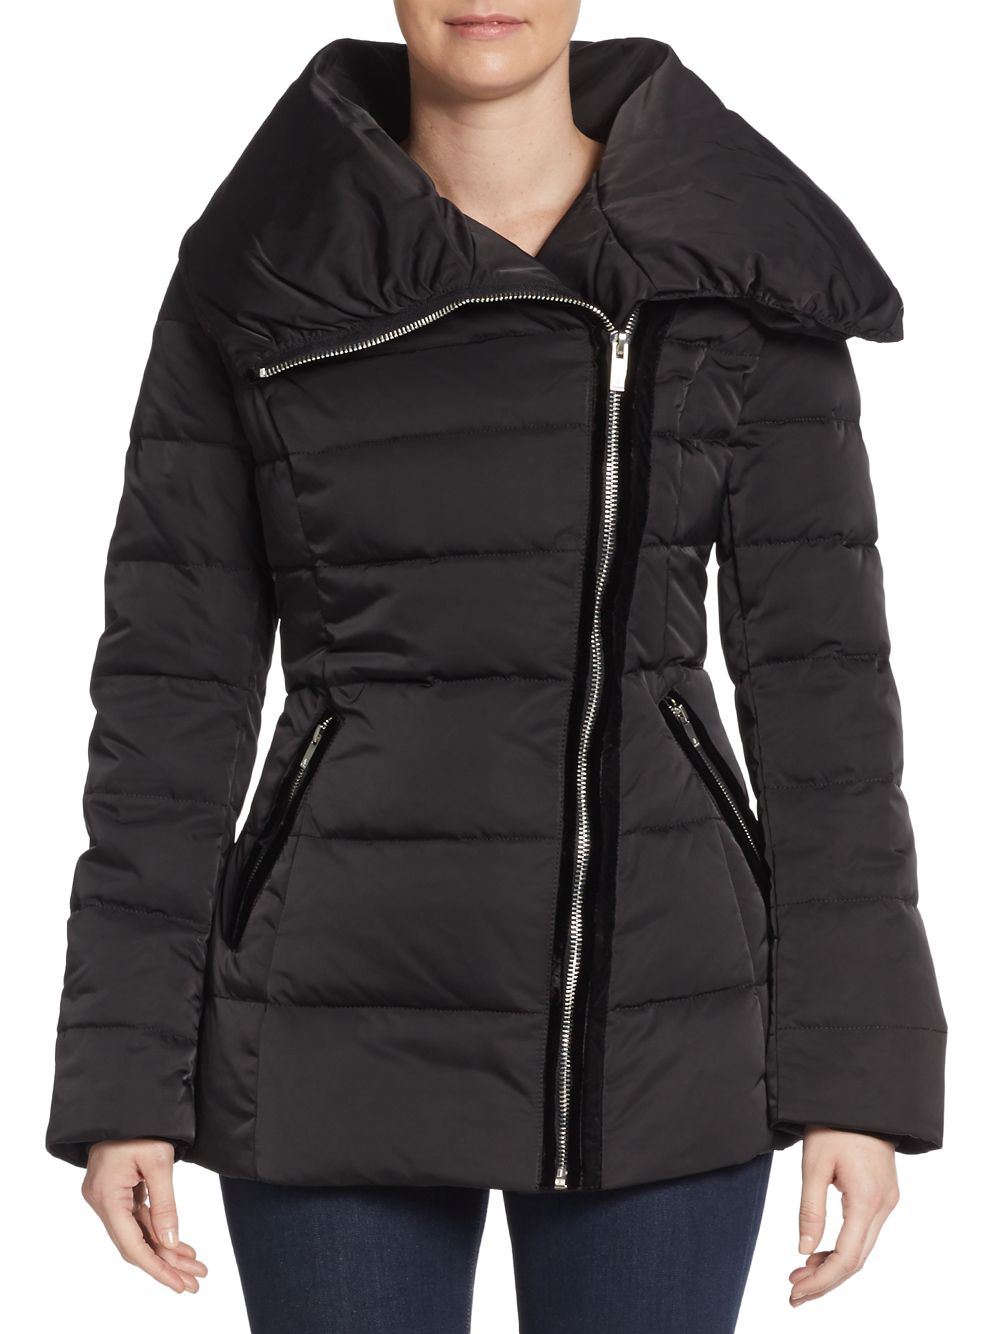 Vera wang Asymmetrical Quilted Puffer Jacket in Black | Lyst